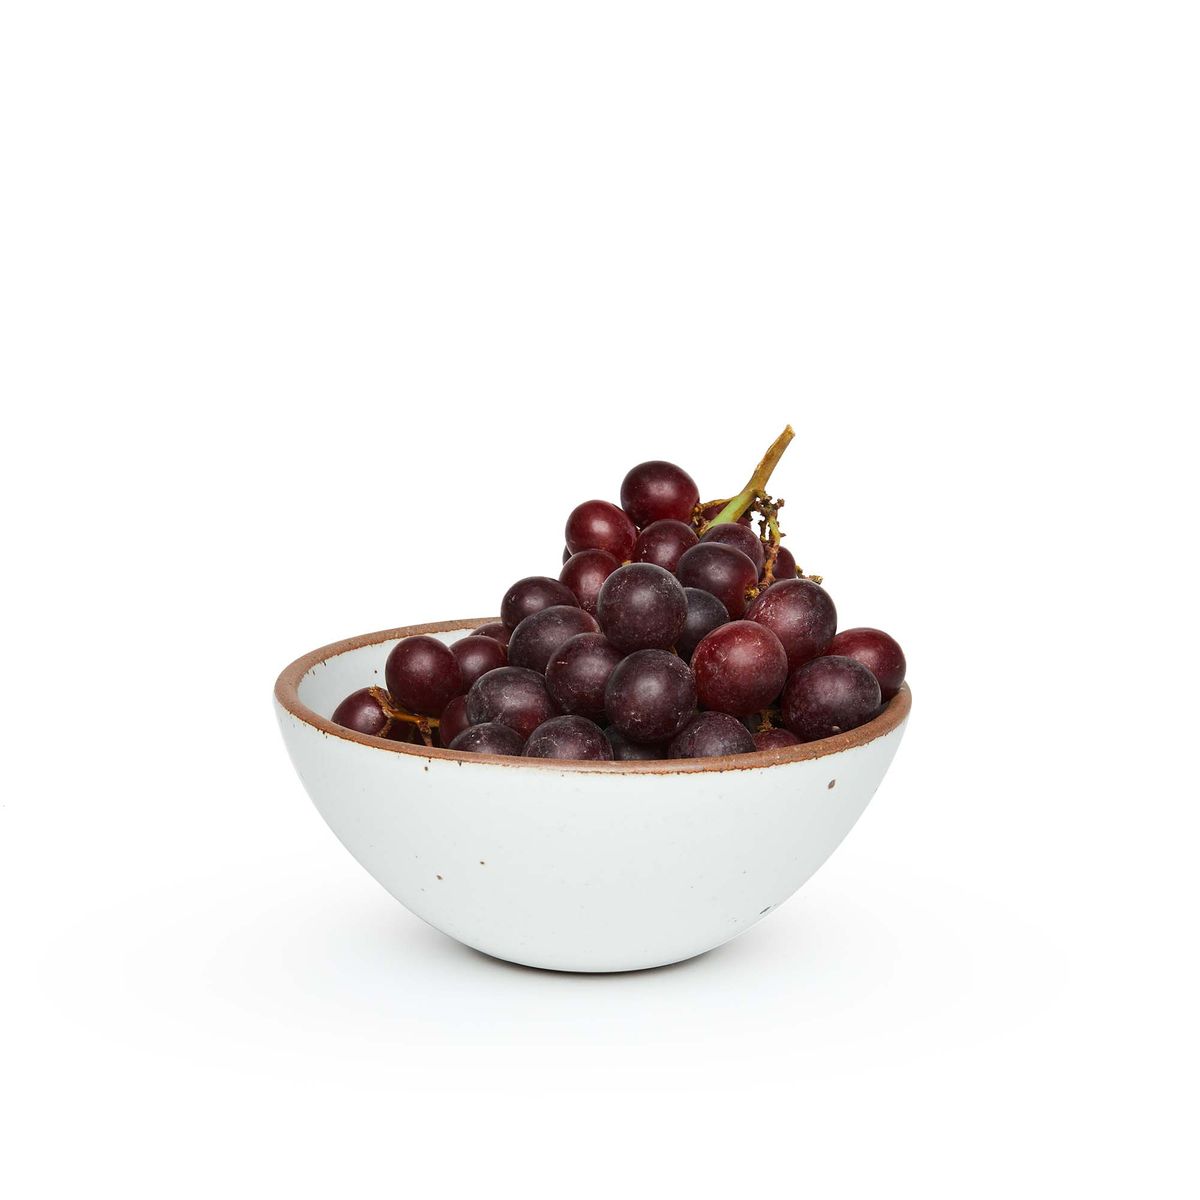 A medium rounded ceramic bowl in a cool white color featuring iron speckles and an unglazed rim, filled with grapes